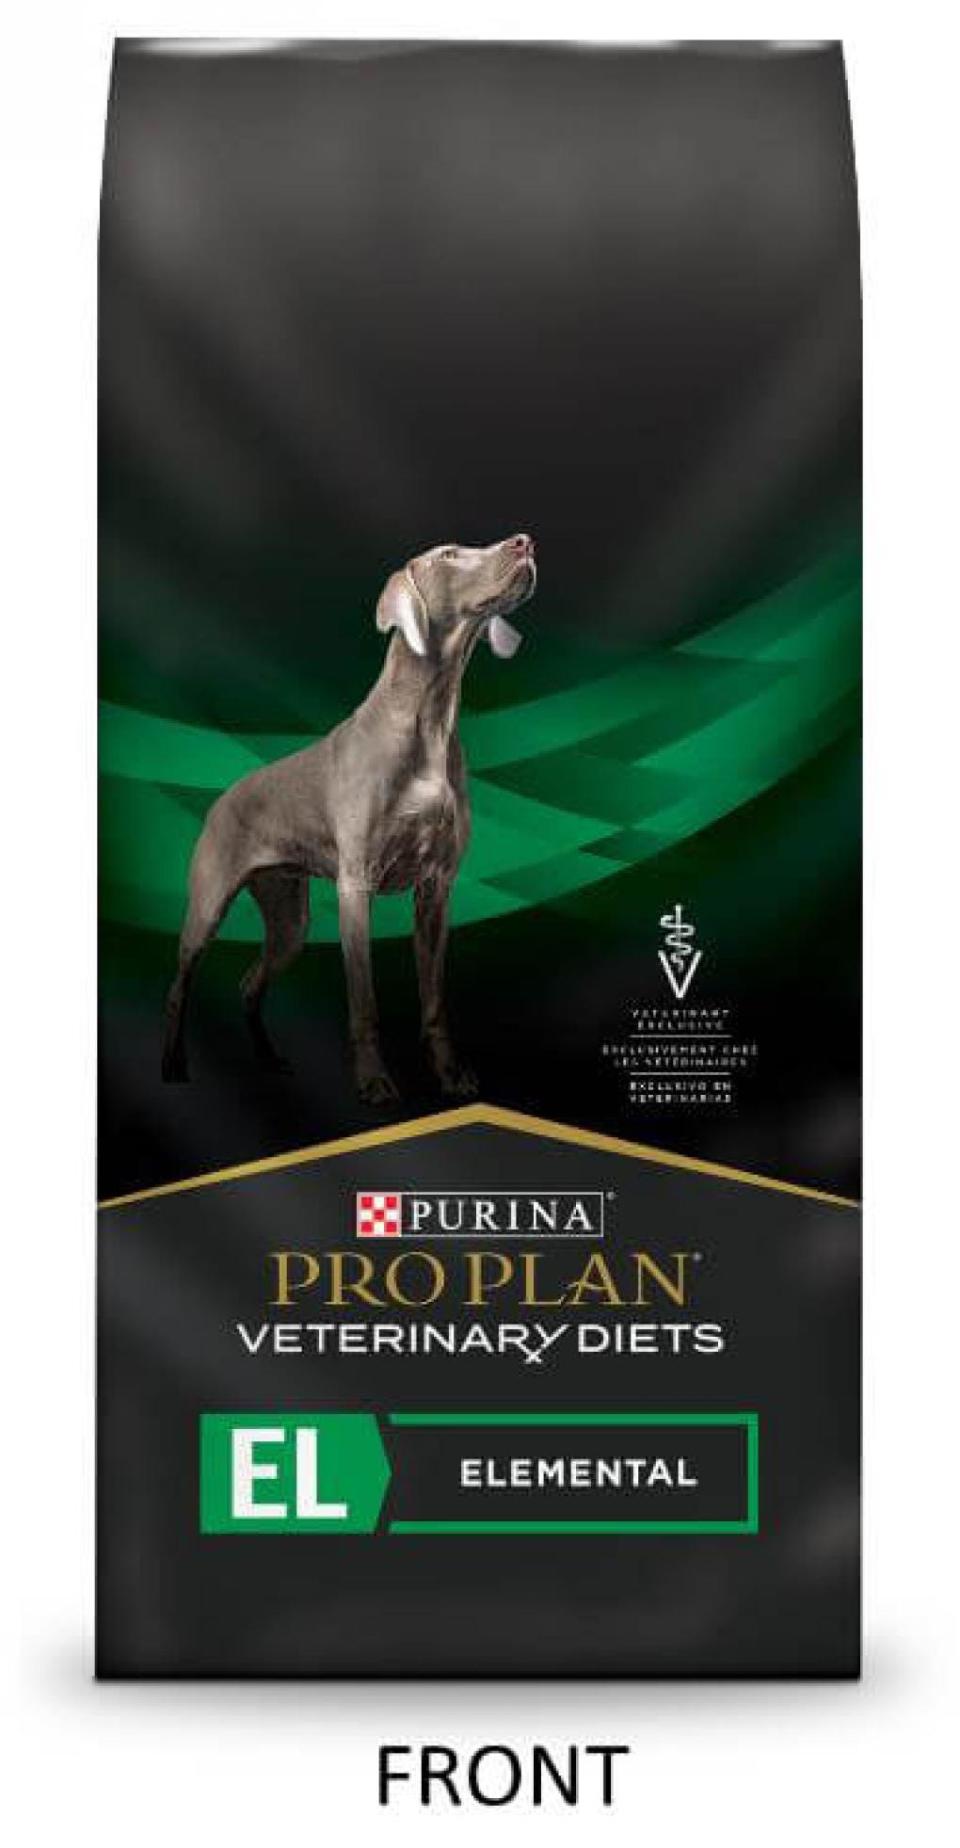 Purina expands recall of dog food in US due to potentially elevated